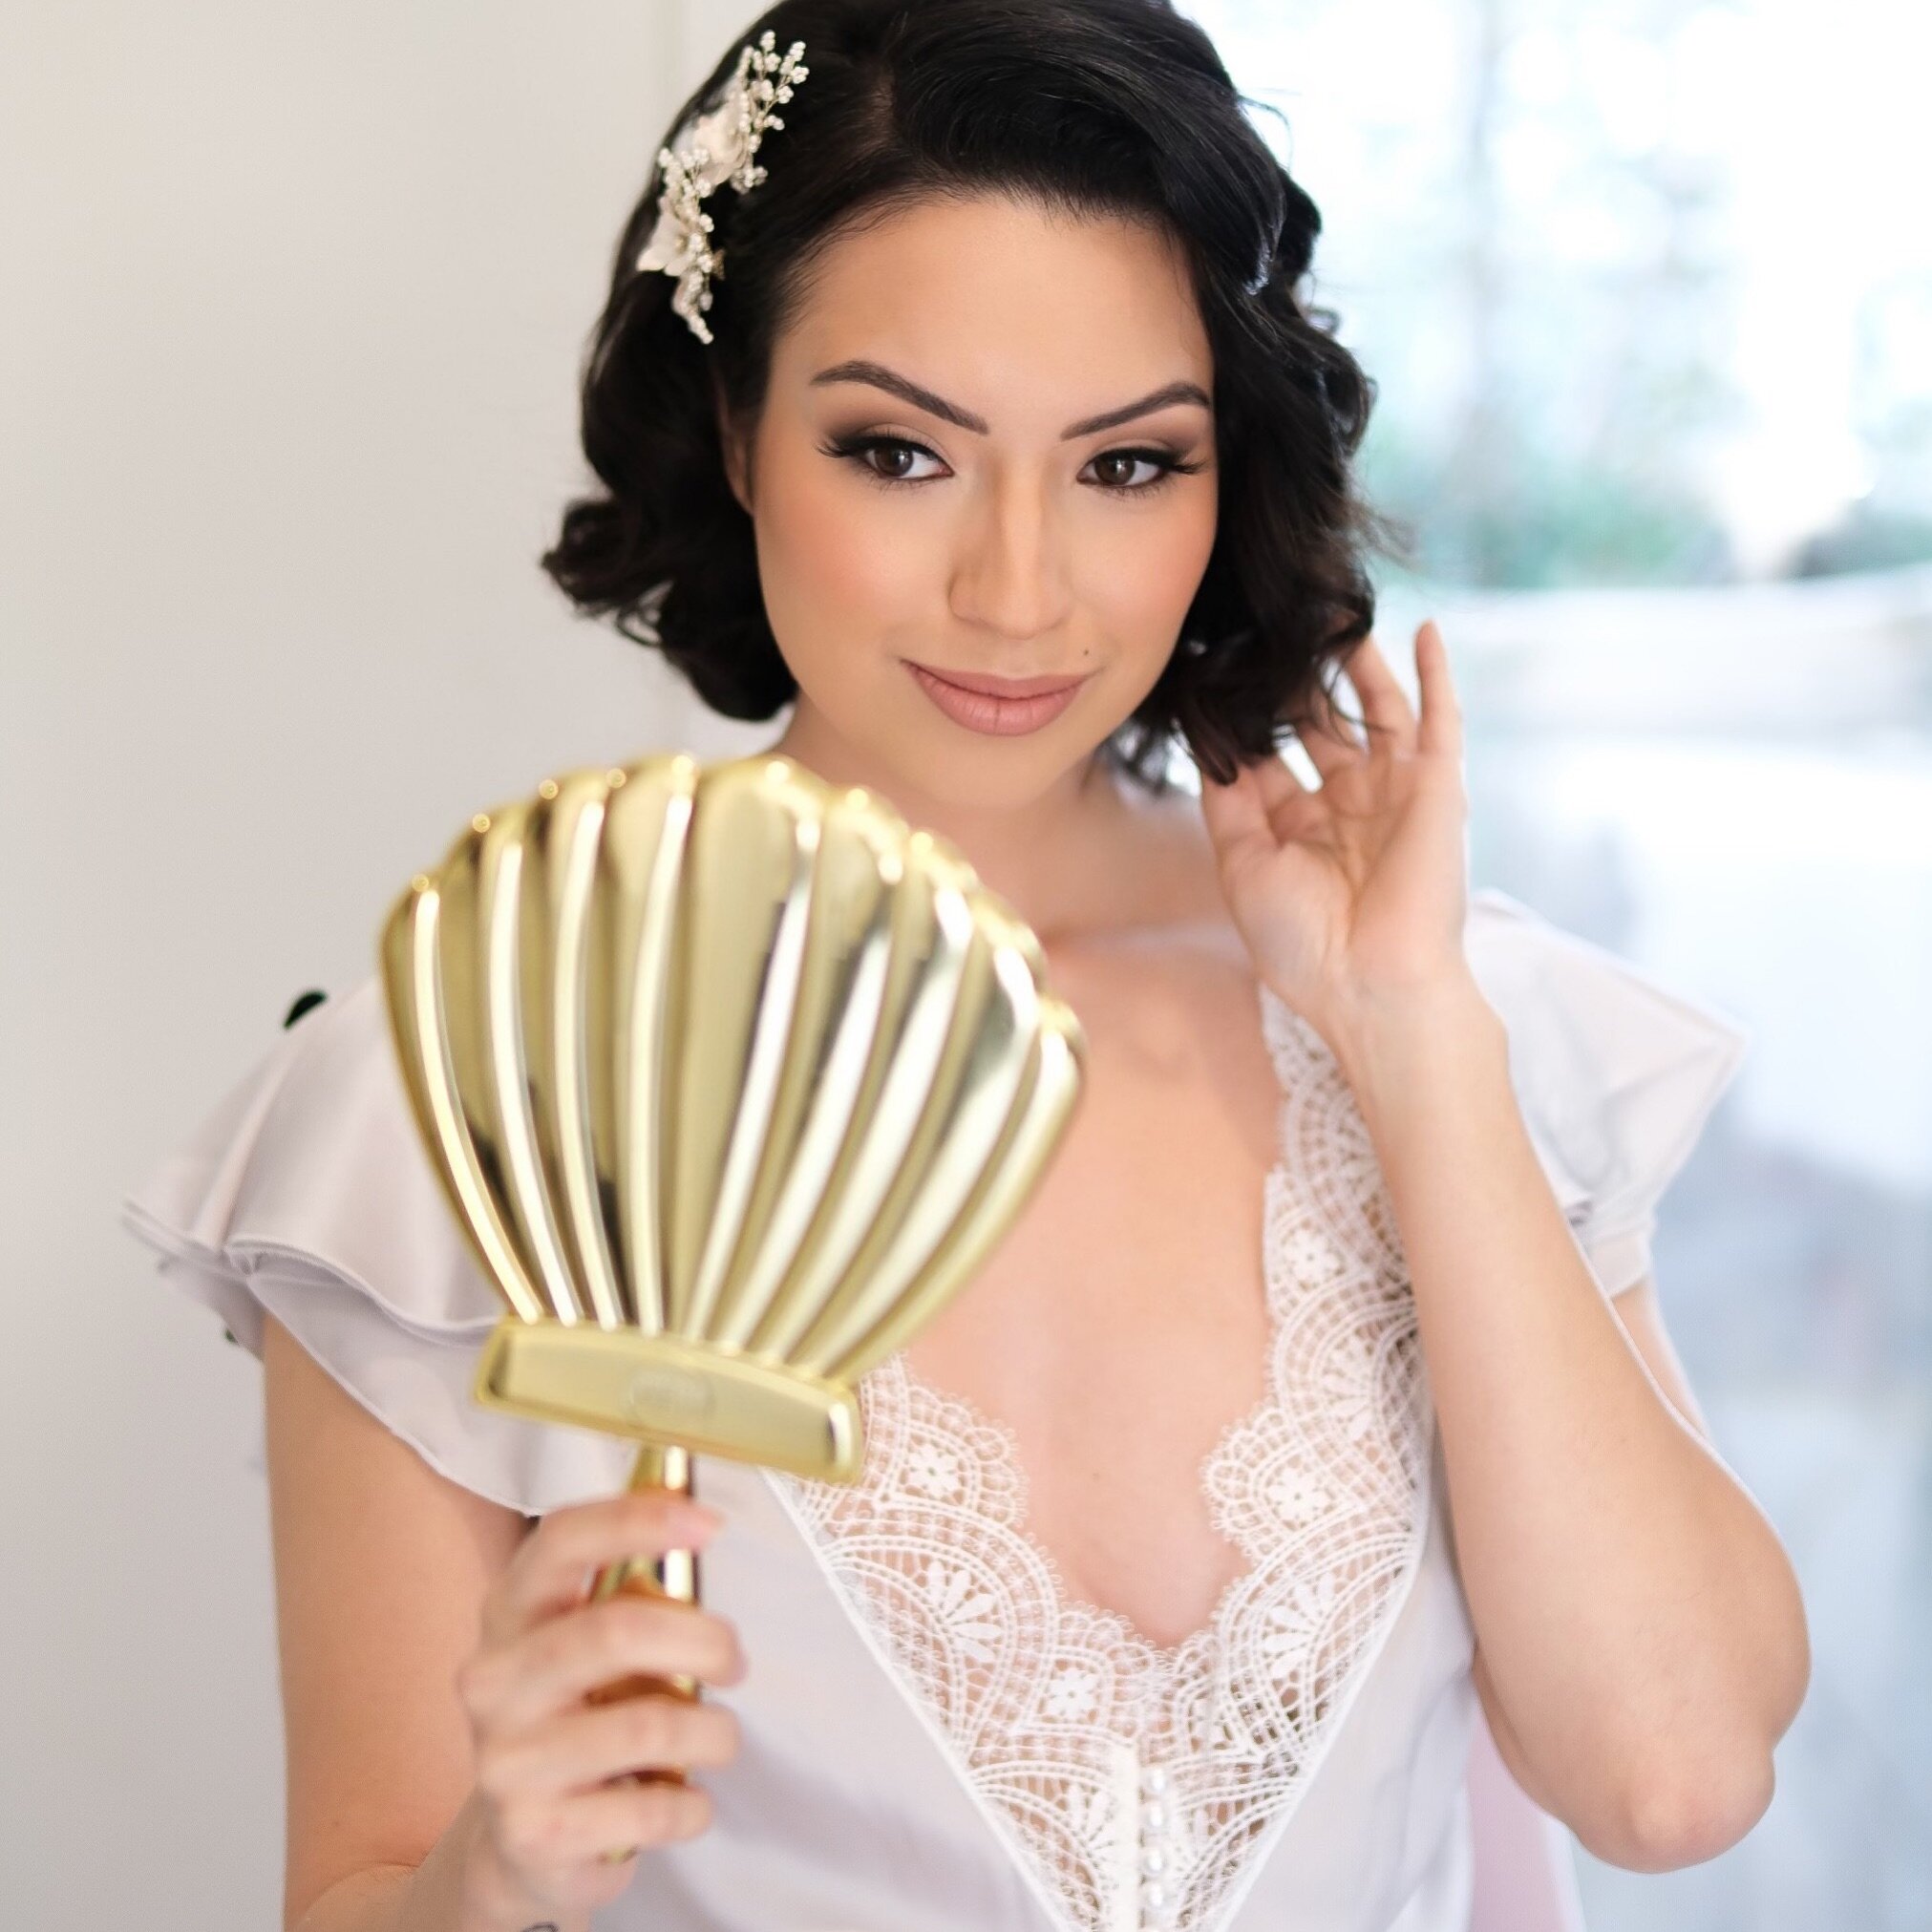 Book the luxury get ready experience with our LYS Professionals 

We are an insured bridal hair and makeup team with over 15 years of experience. We hope to make your bridal experience one to remember. #losangelesmakeupartist #losangelesbridalteam #l